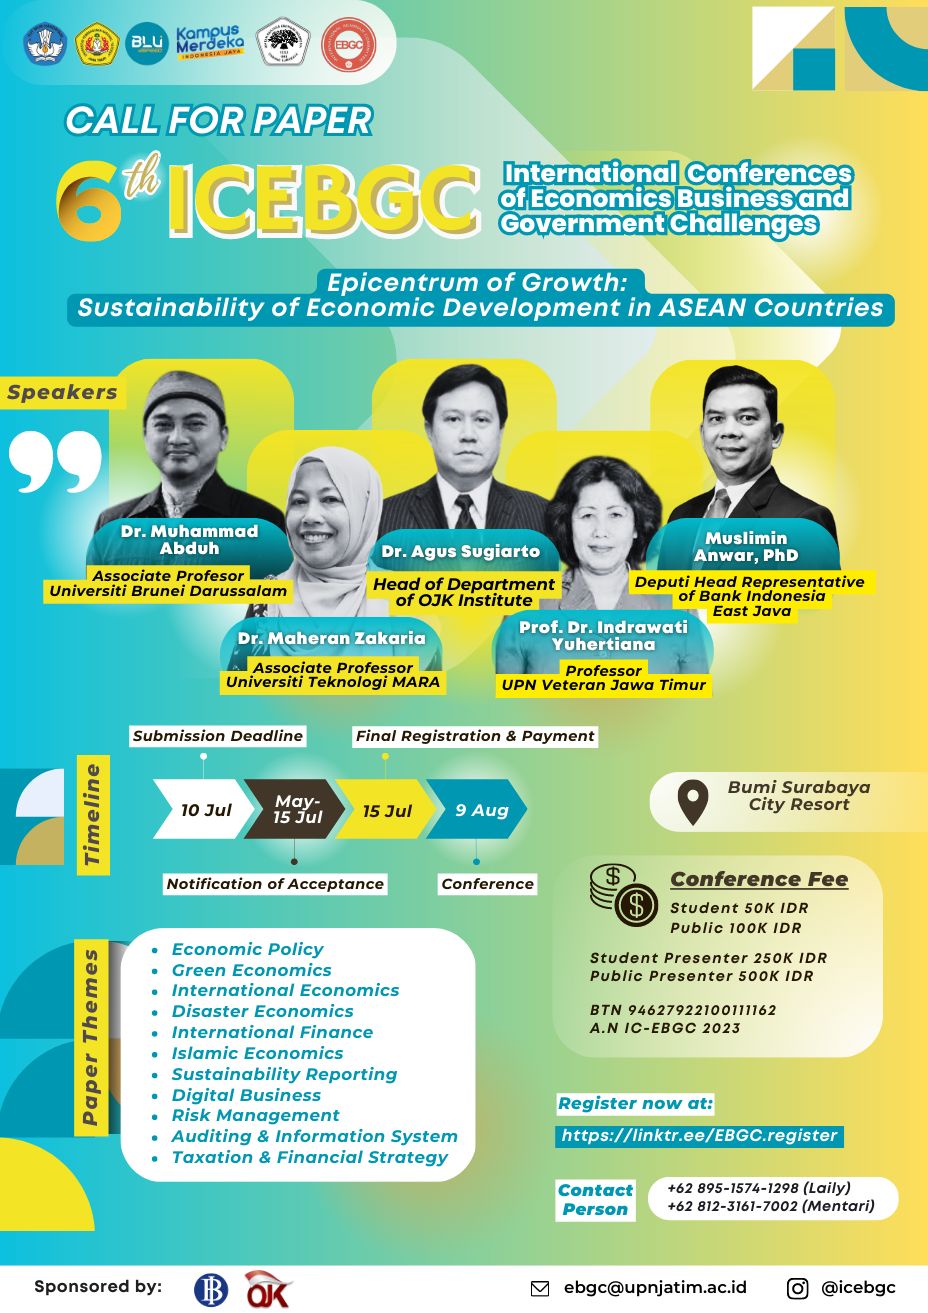 International Conference of Economics, Business, and Government Challenges  6th ICEBGC 2023 by Faculty Business and Economics UPN Veteran Jawa Timur  "Welcome to the seminar and Call for Paper 'Epicentrum of Growth: